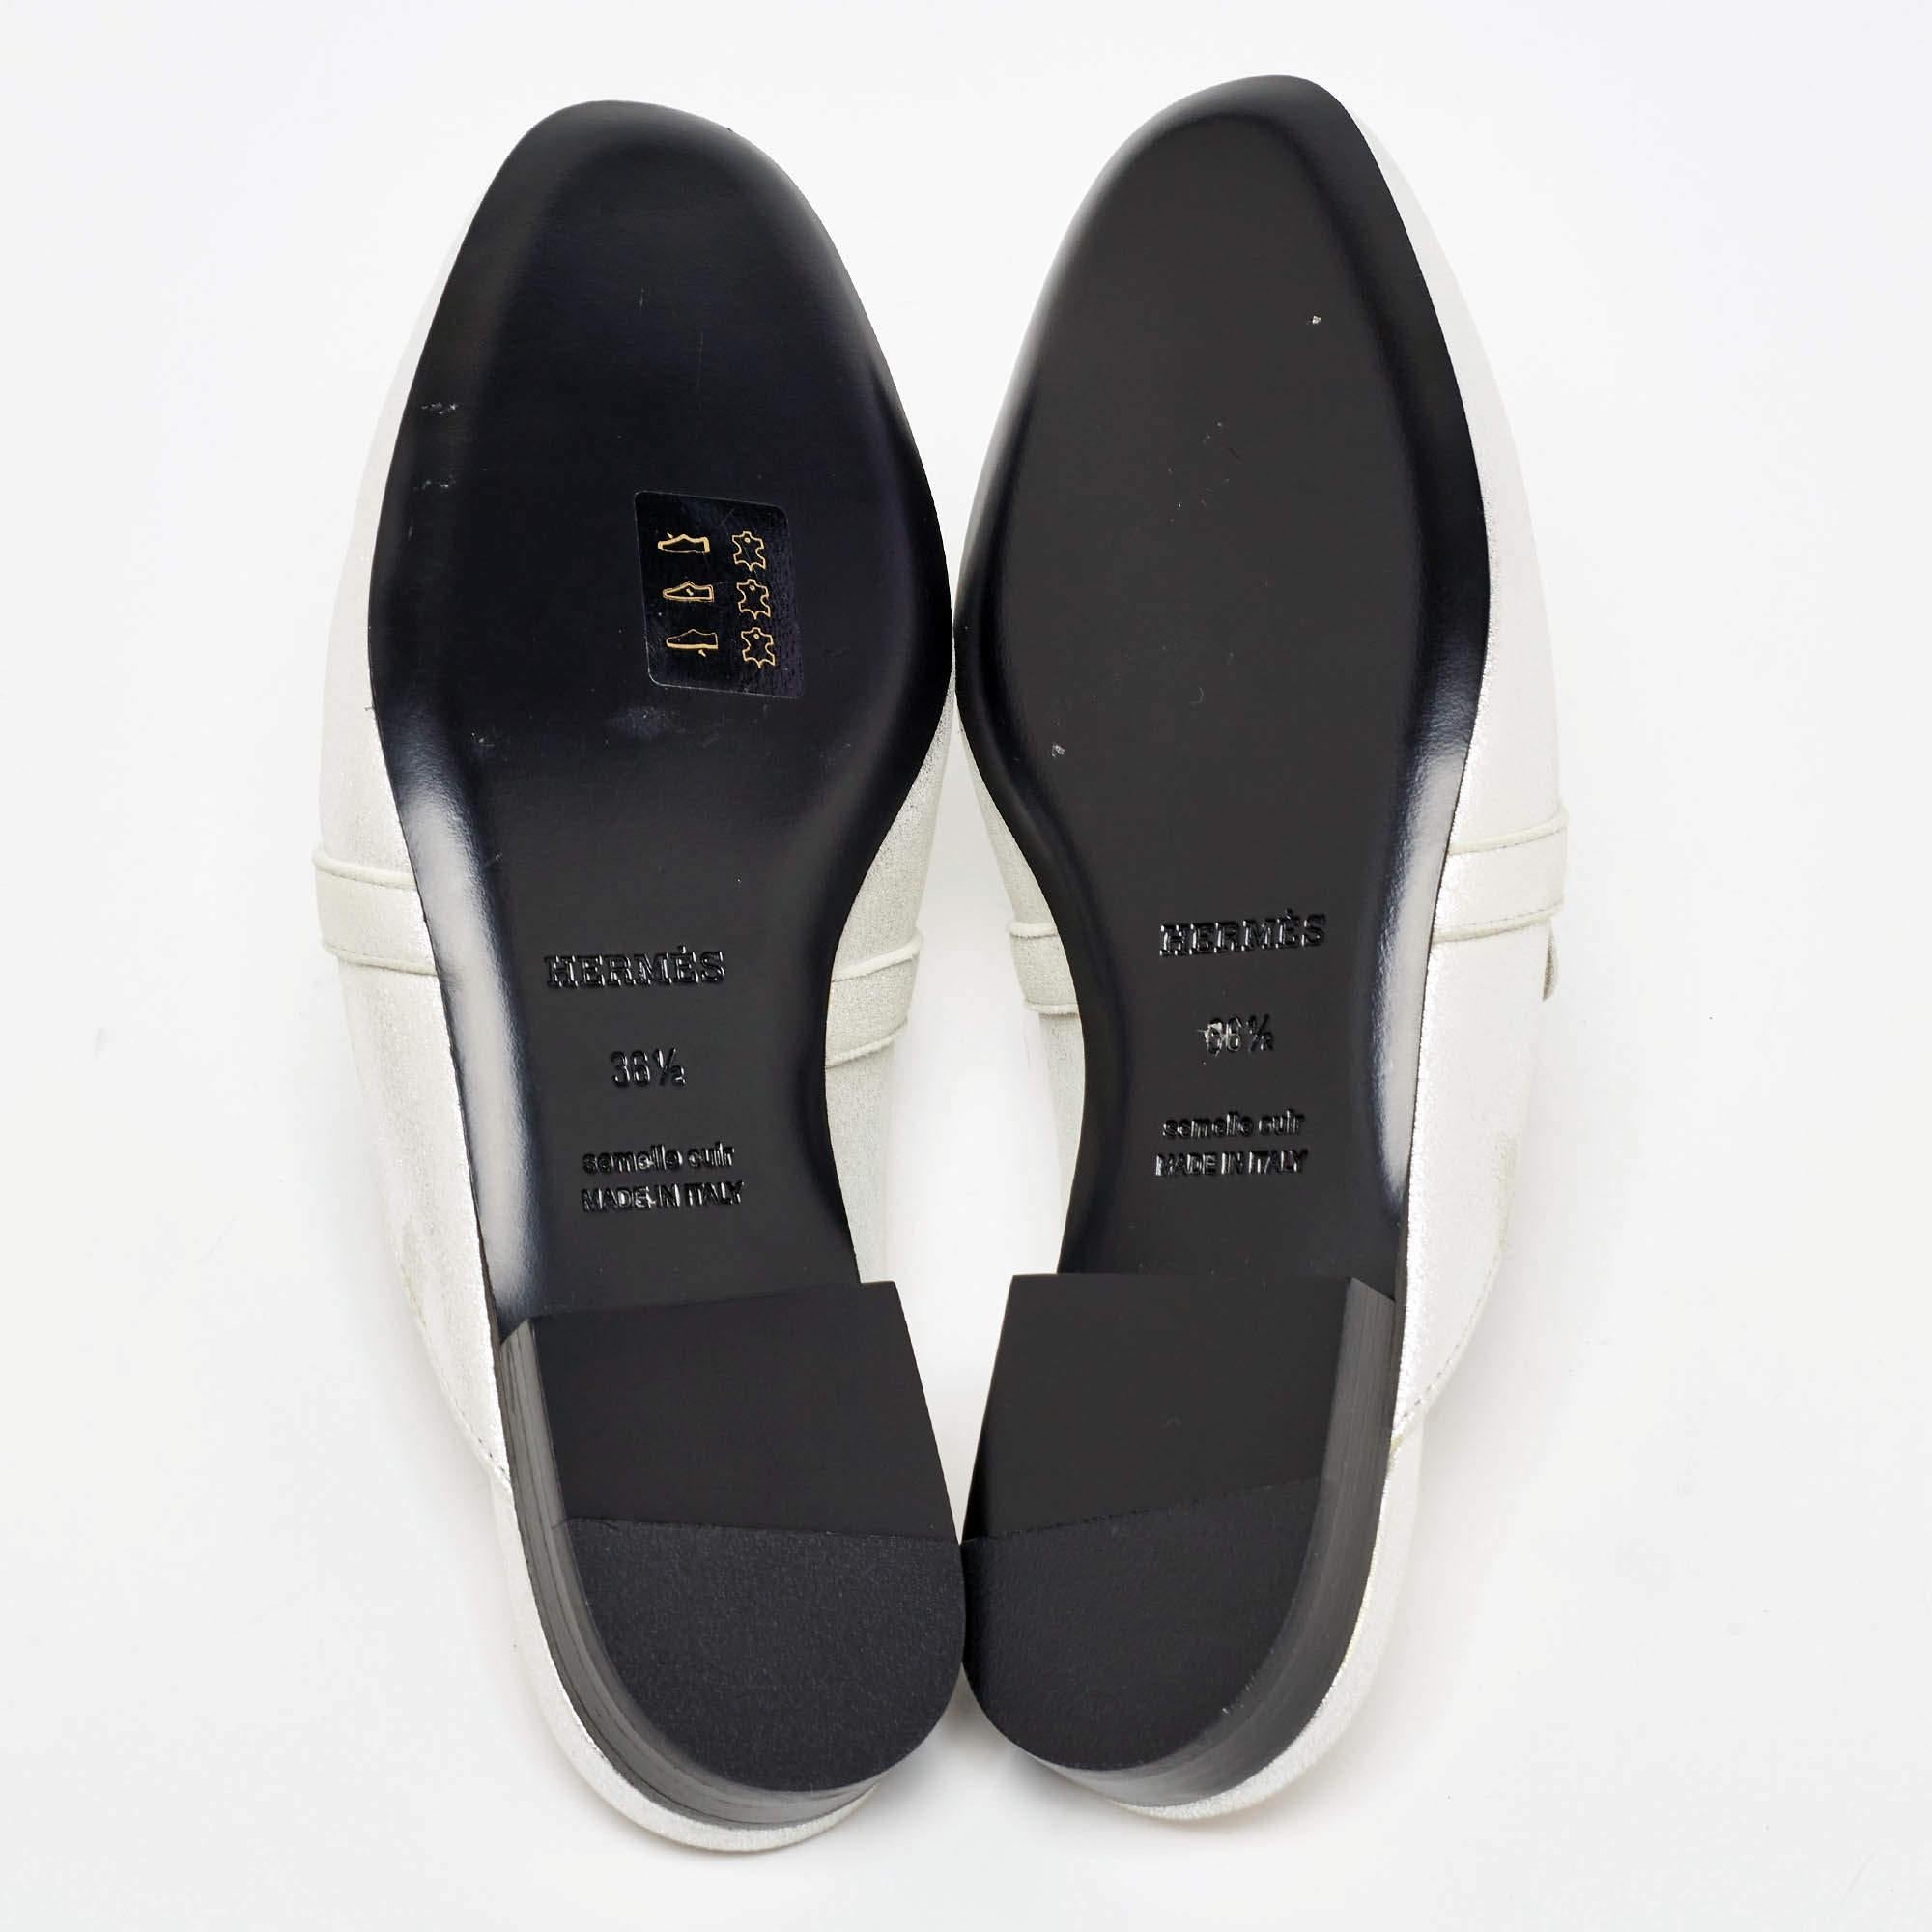 Hermes Silver Textured Suede Oz Flat Mules Size 36.5 4